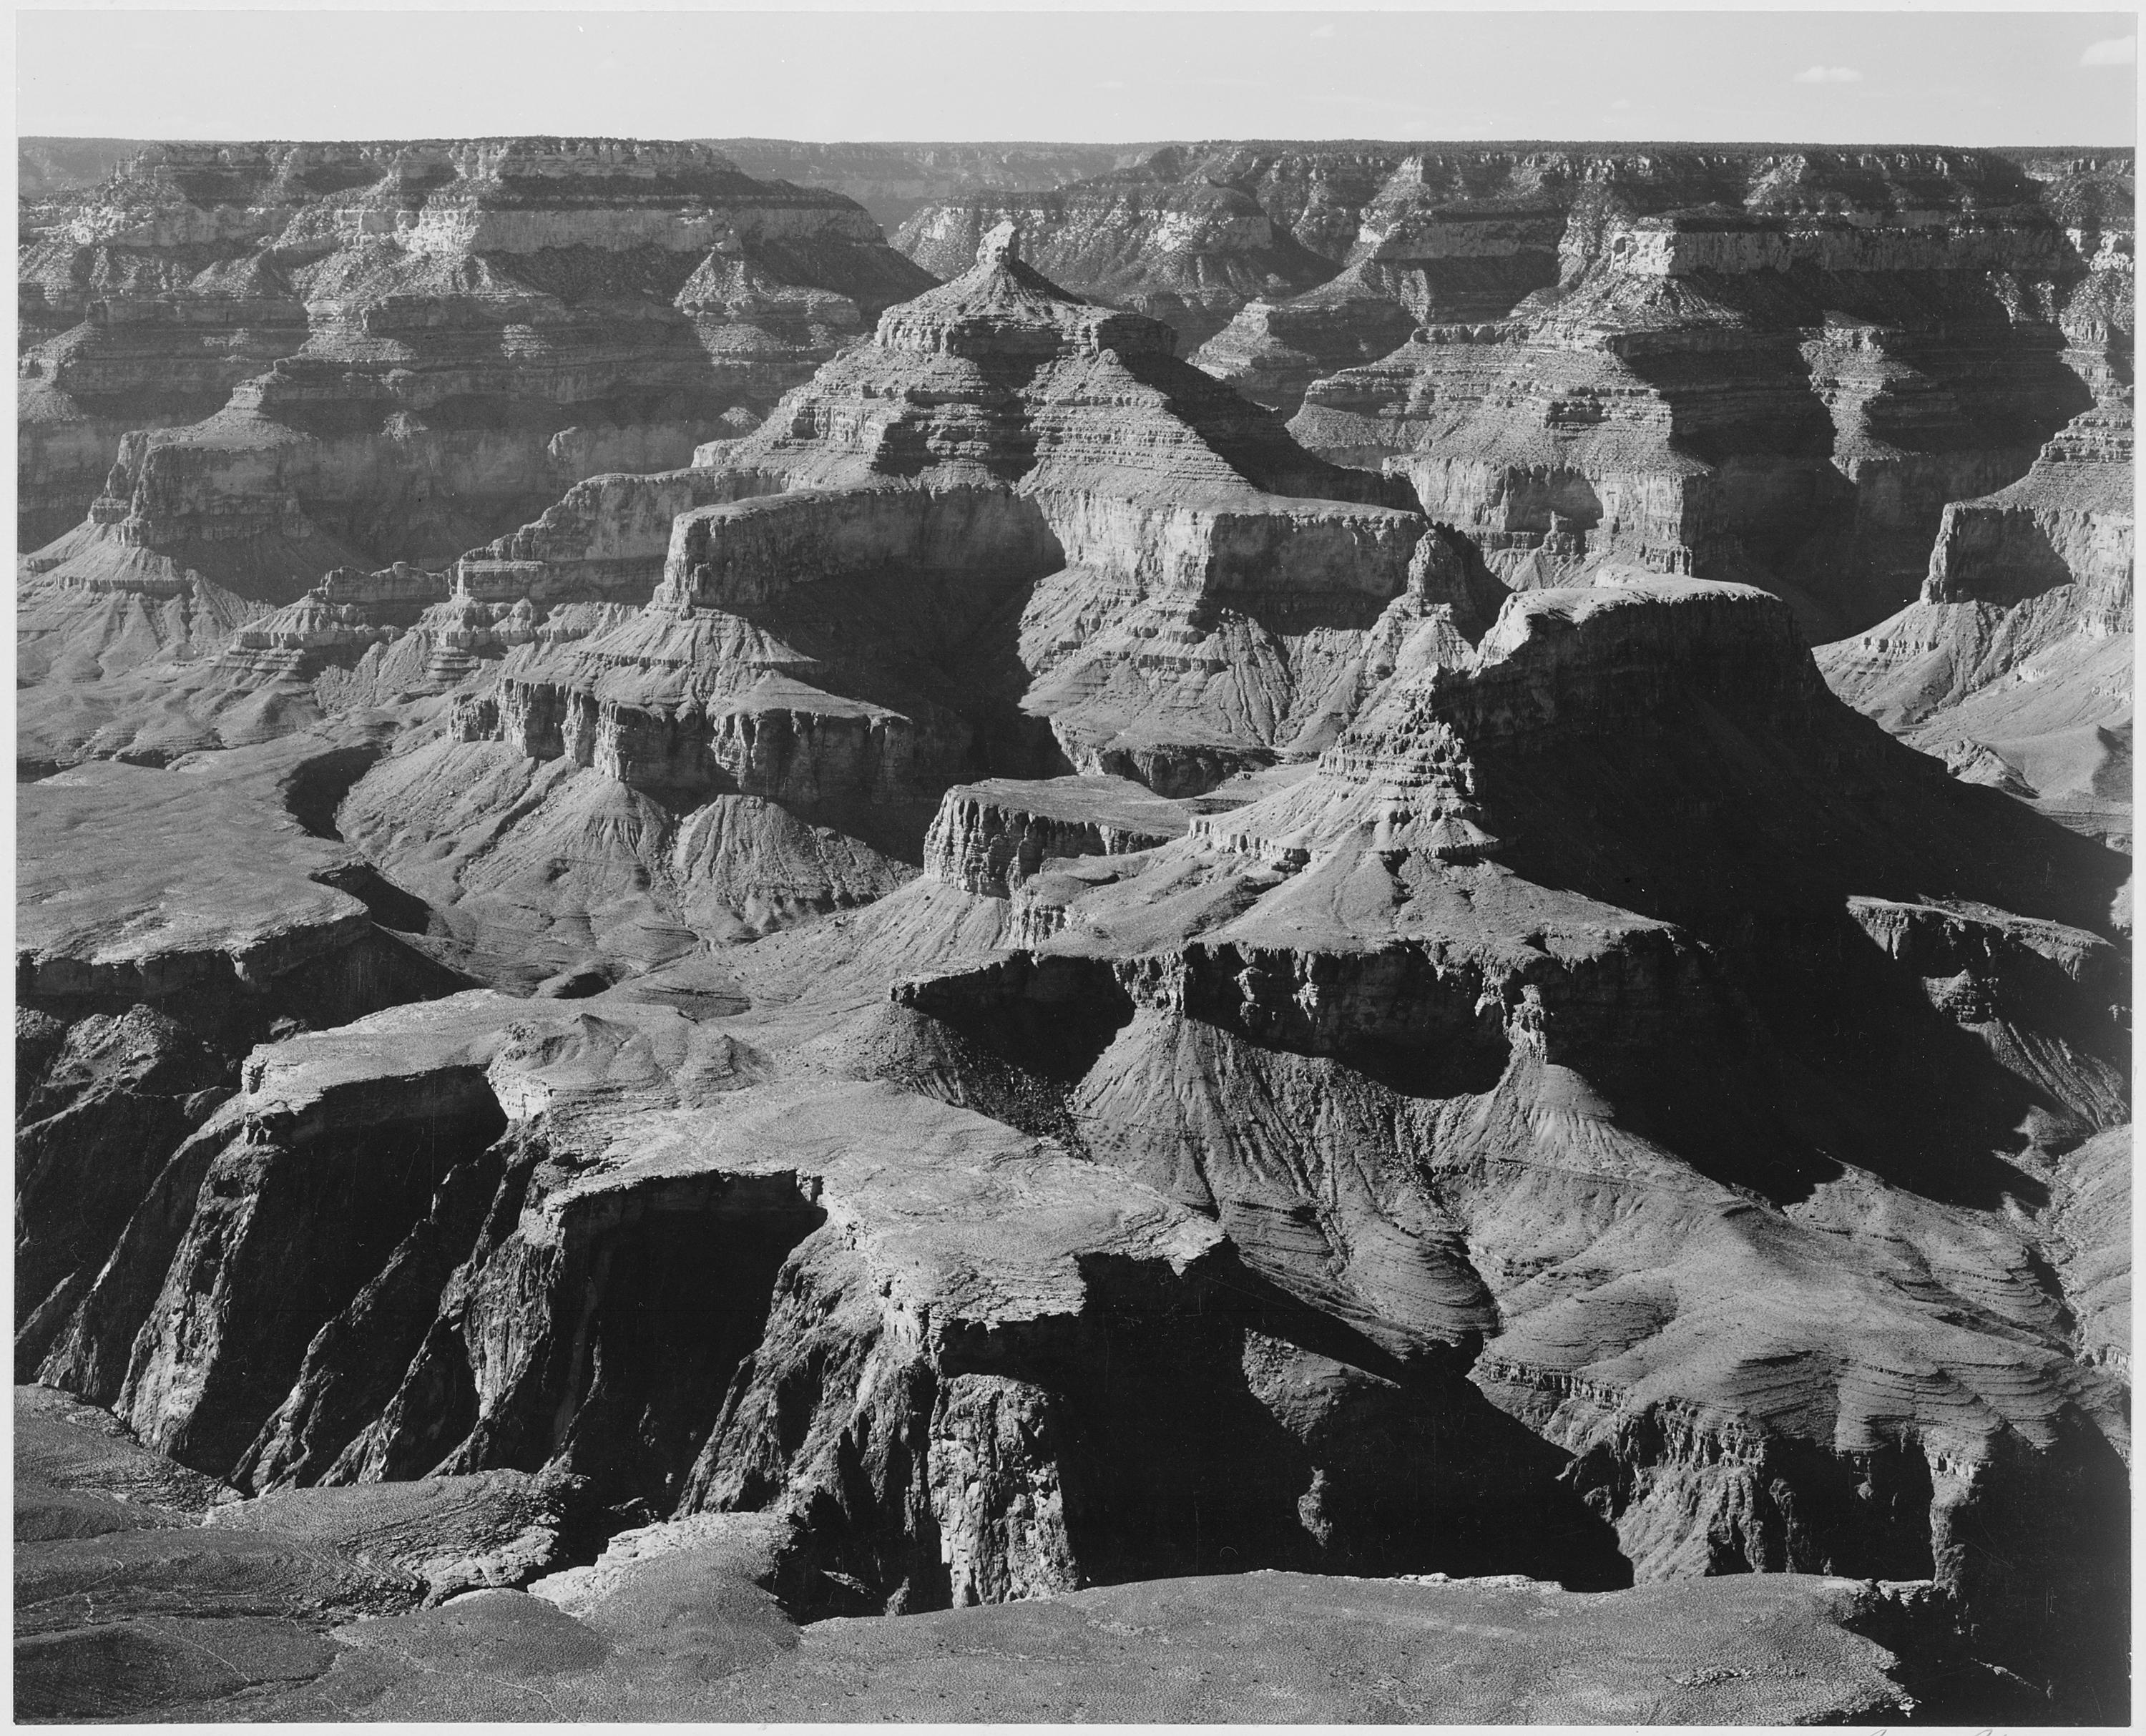 Ansel Adams - National Archives 79-AA-F11